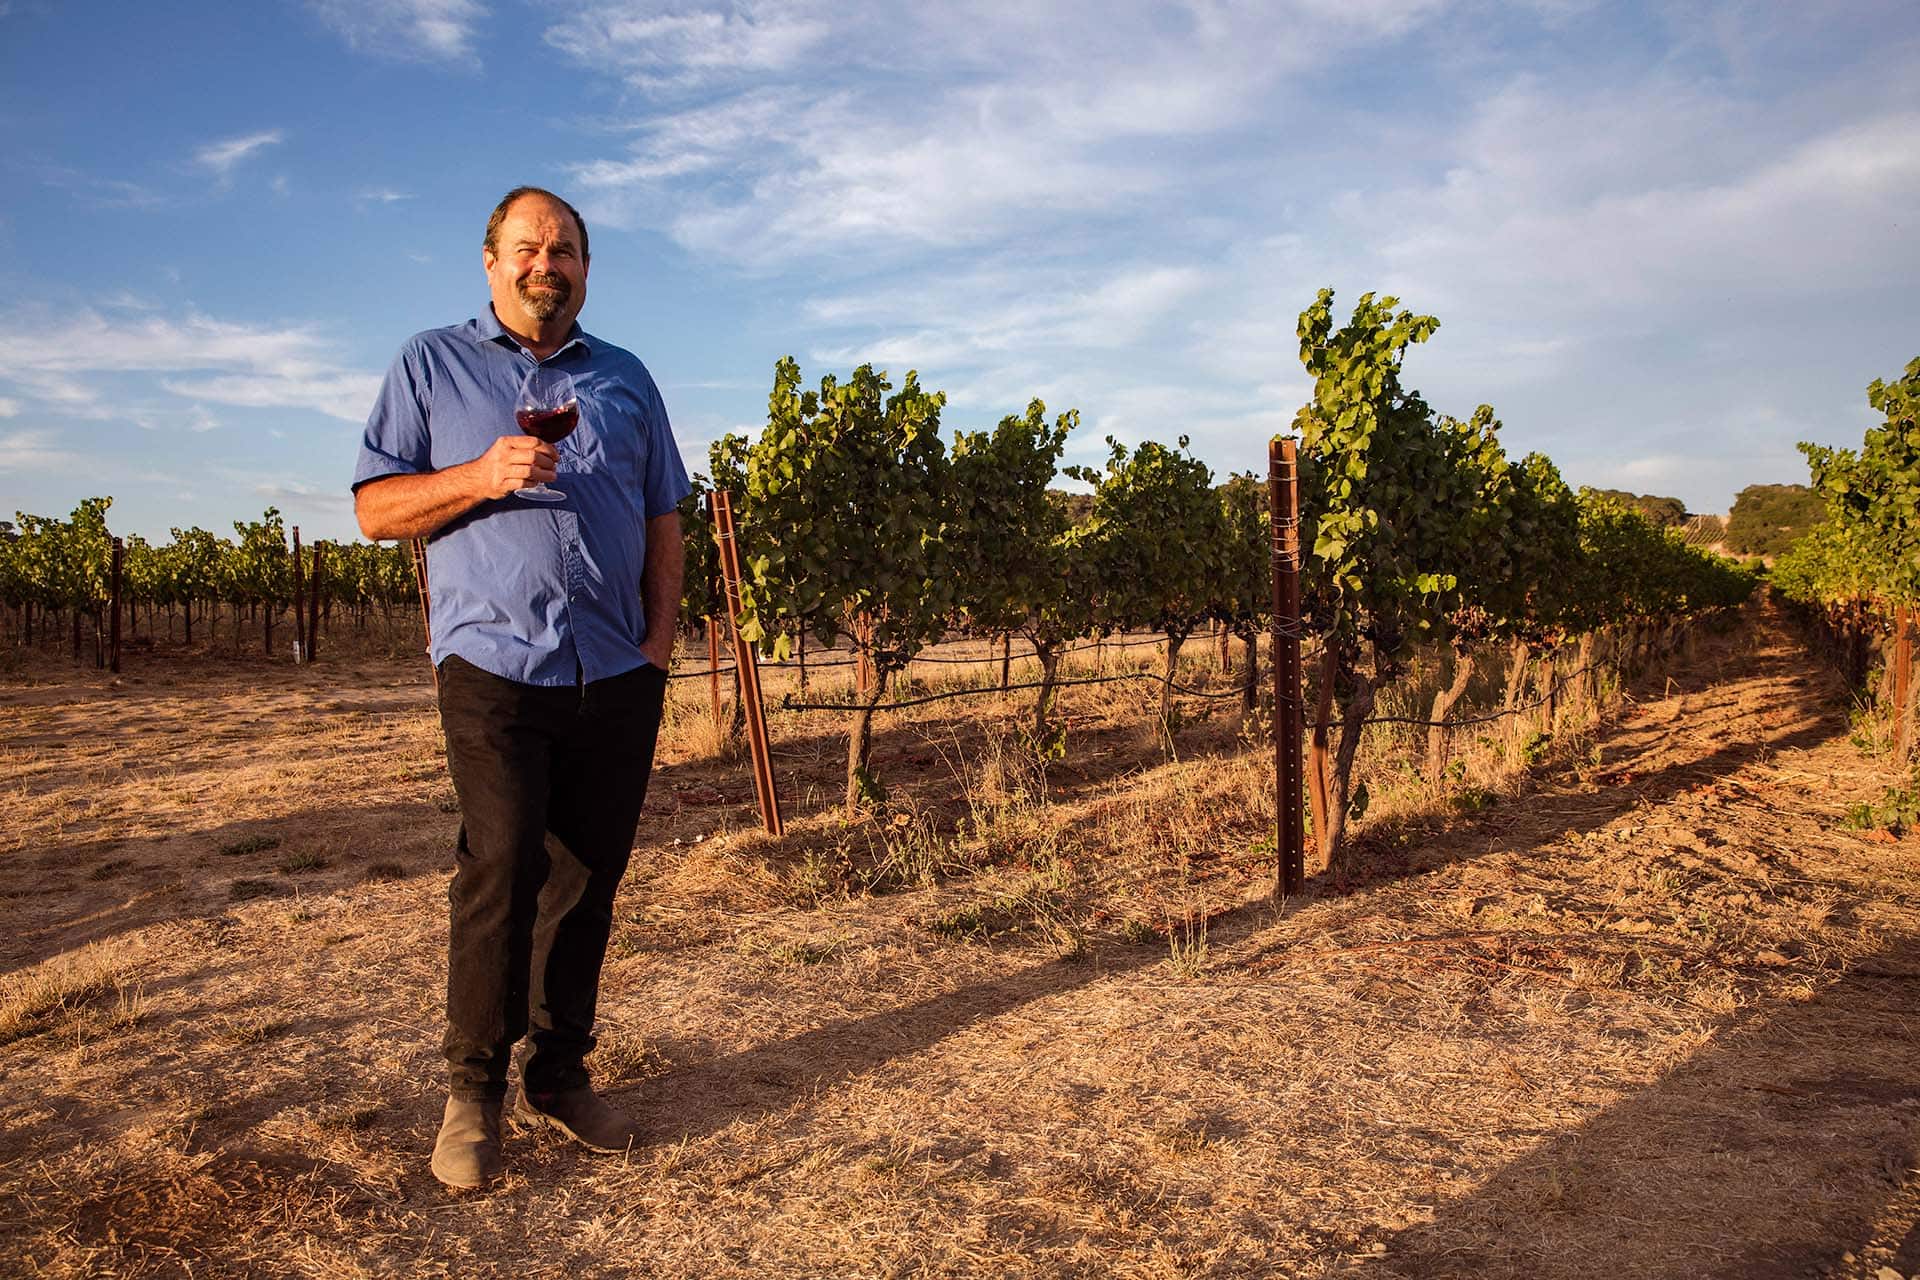 A man in a blue shirt and black pants stands in a vineyard, holding a glass of red wine. The vineyard stretches out behind him under a slightly cloudy sky. The ground is dry and sunlit, and the grapevines are supported by wooden stakes and wires. The man appears relaxed and content.
